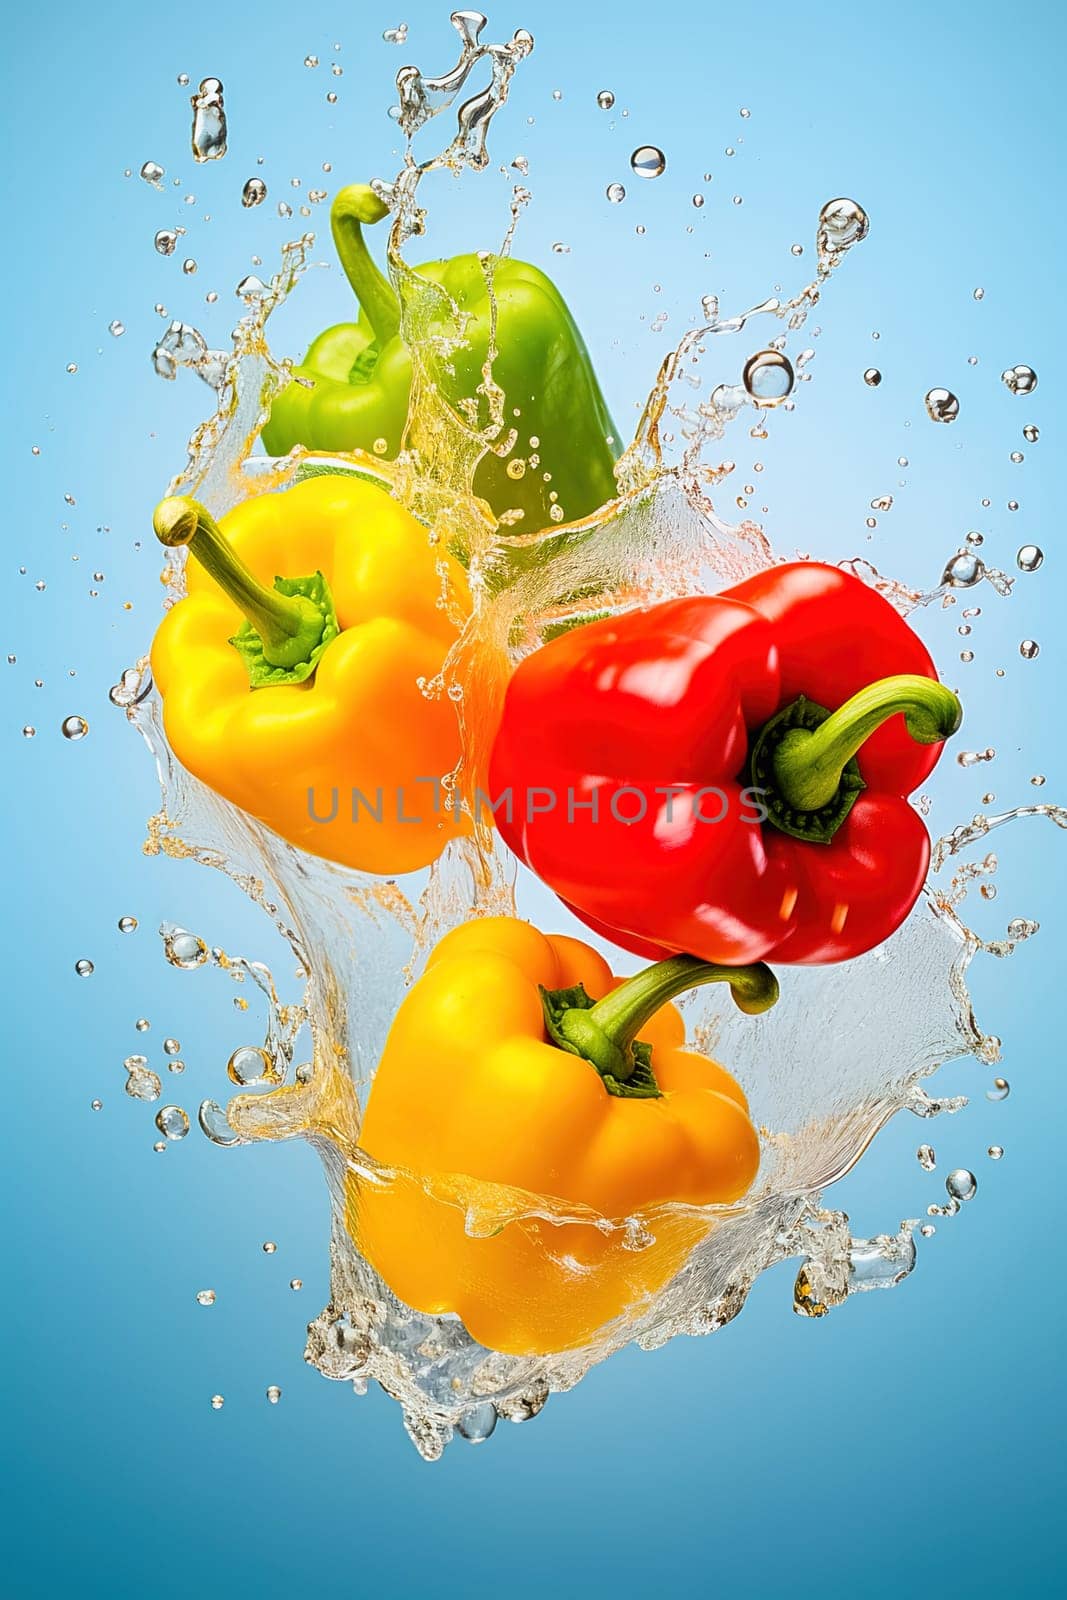 Red, yellow and green peppers with water splashes. Levitation. by Yurich32